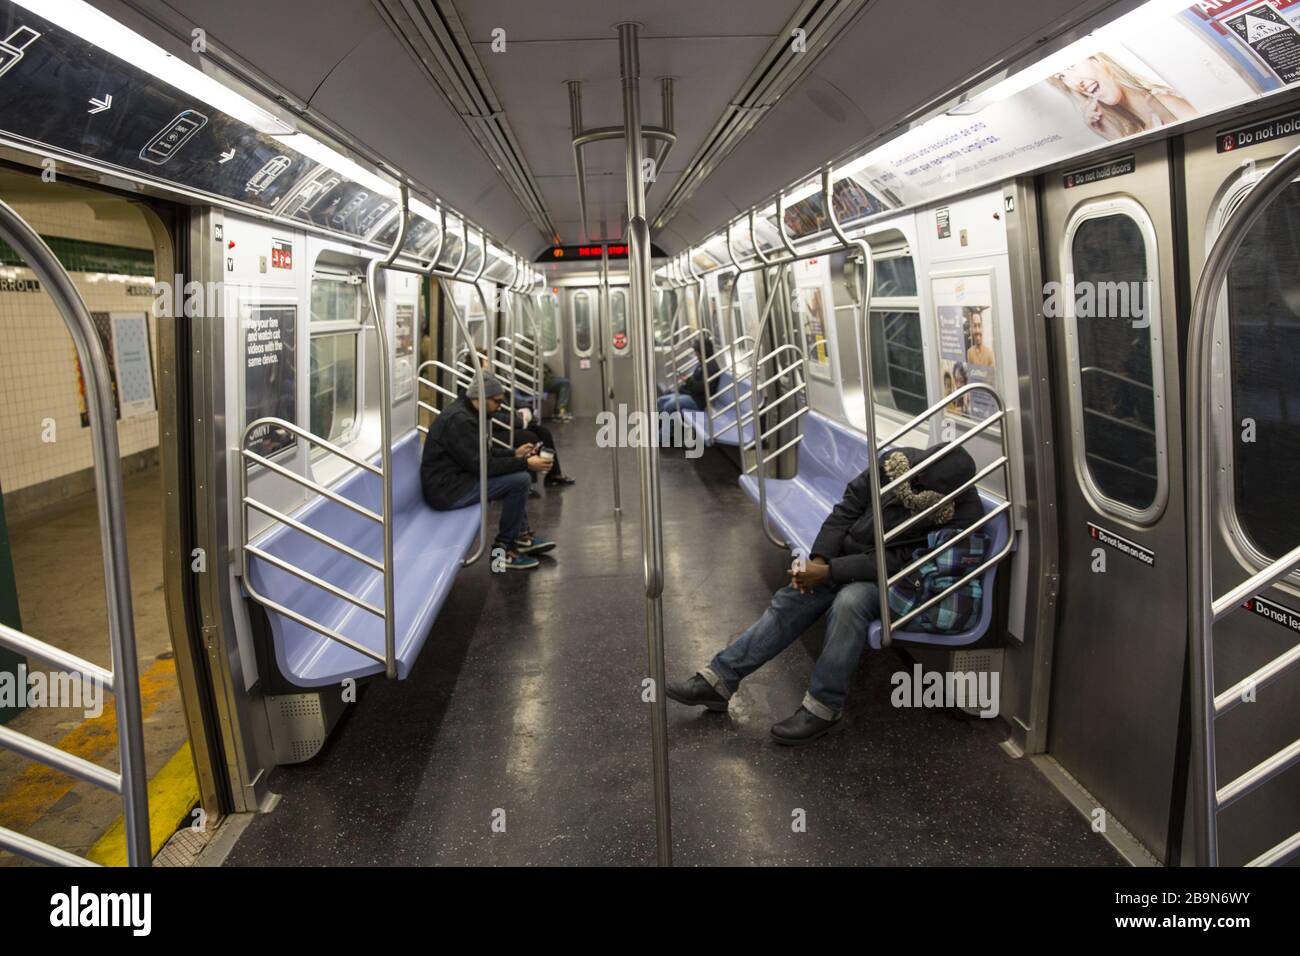 As New York City goes into official lockdown it is not difficult to practice social distancing on subways  as relatively few people are riding the trains. Brooklyn, NY. Stock Photo